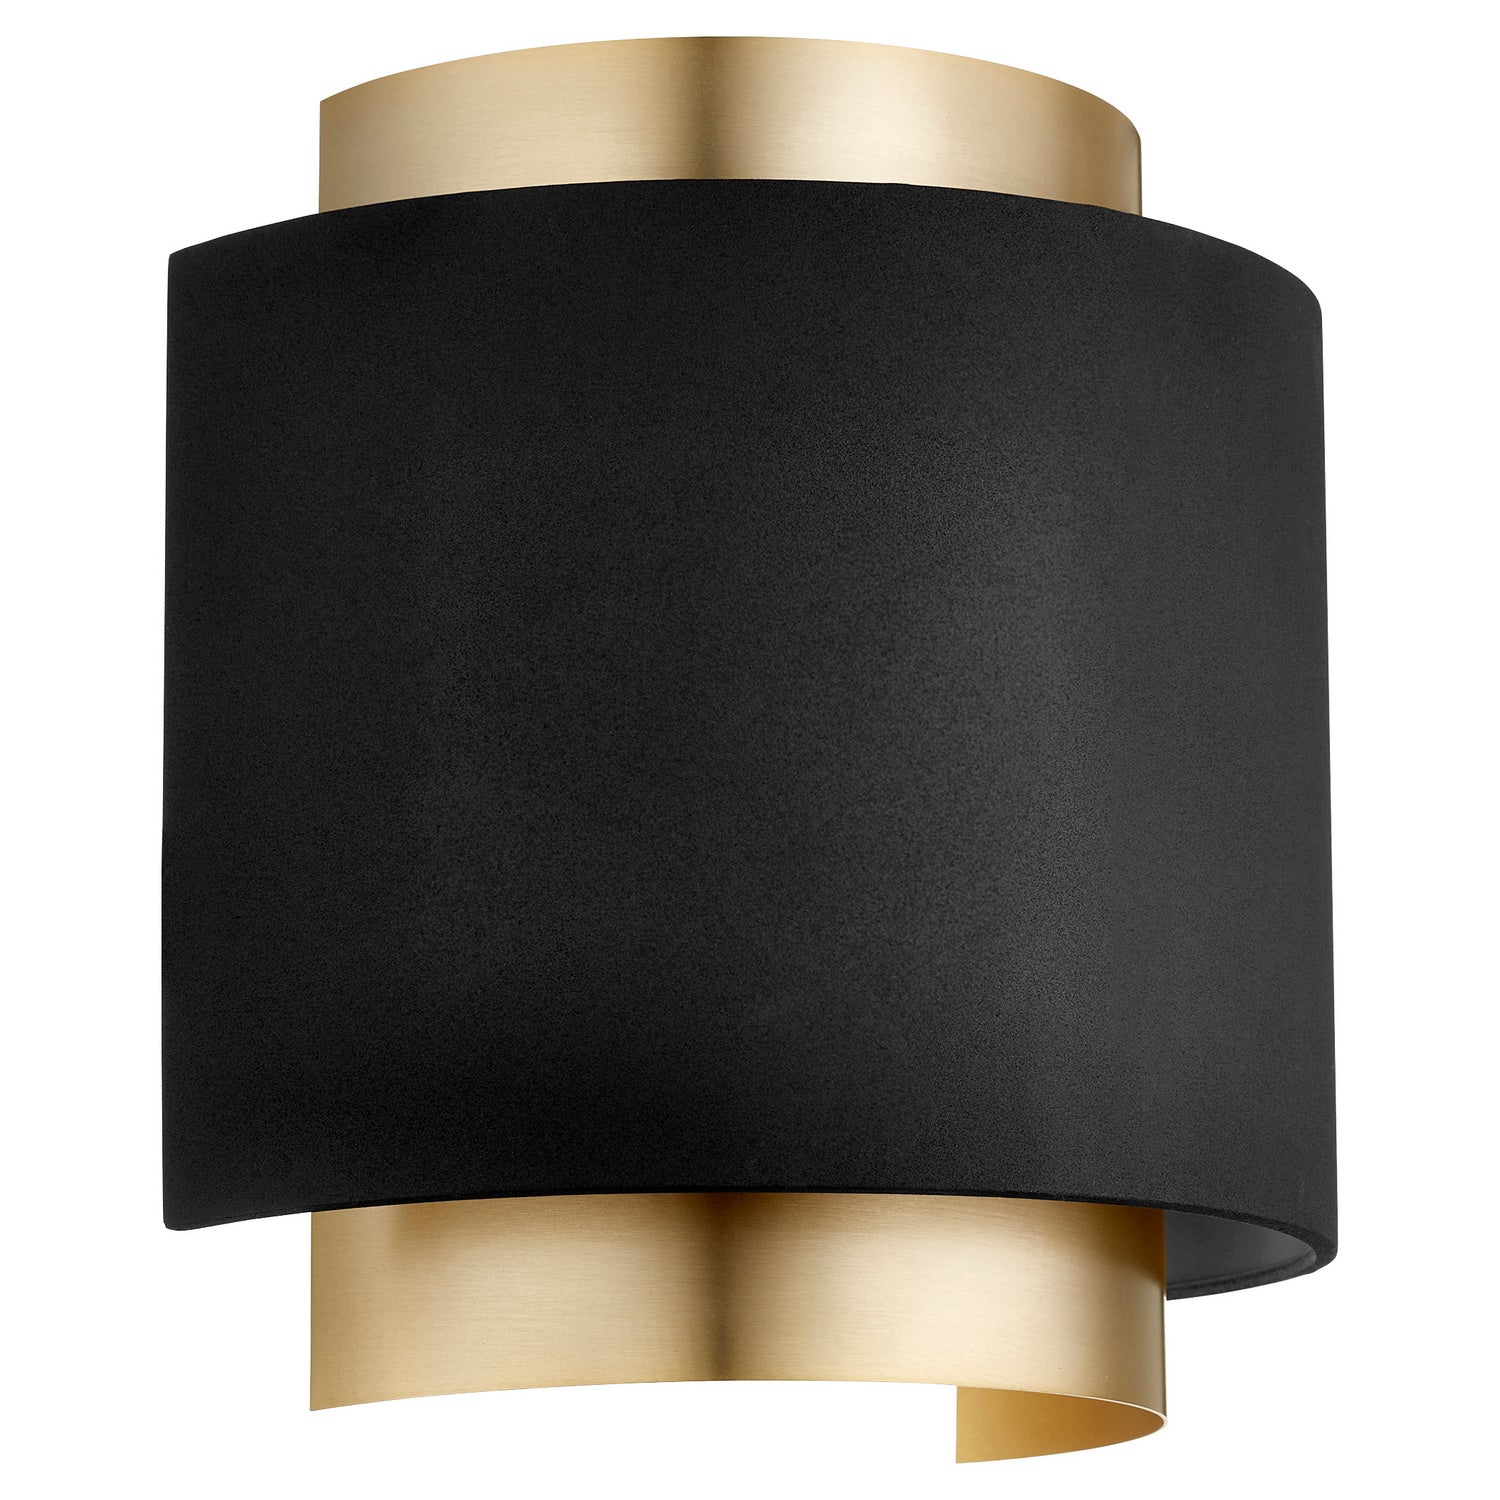 Quorum - 5610-6980 - One Light Wall Sconce - 5610 Half Drum Sconce - Textured Black w/ Aged Brass